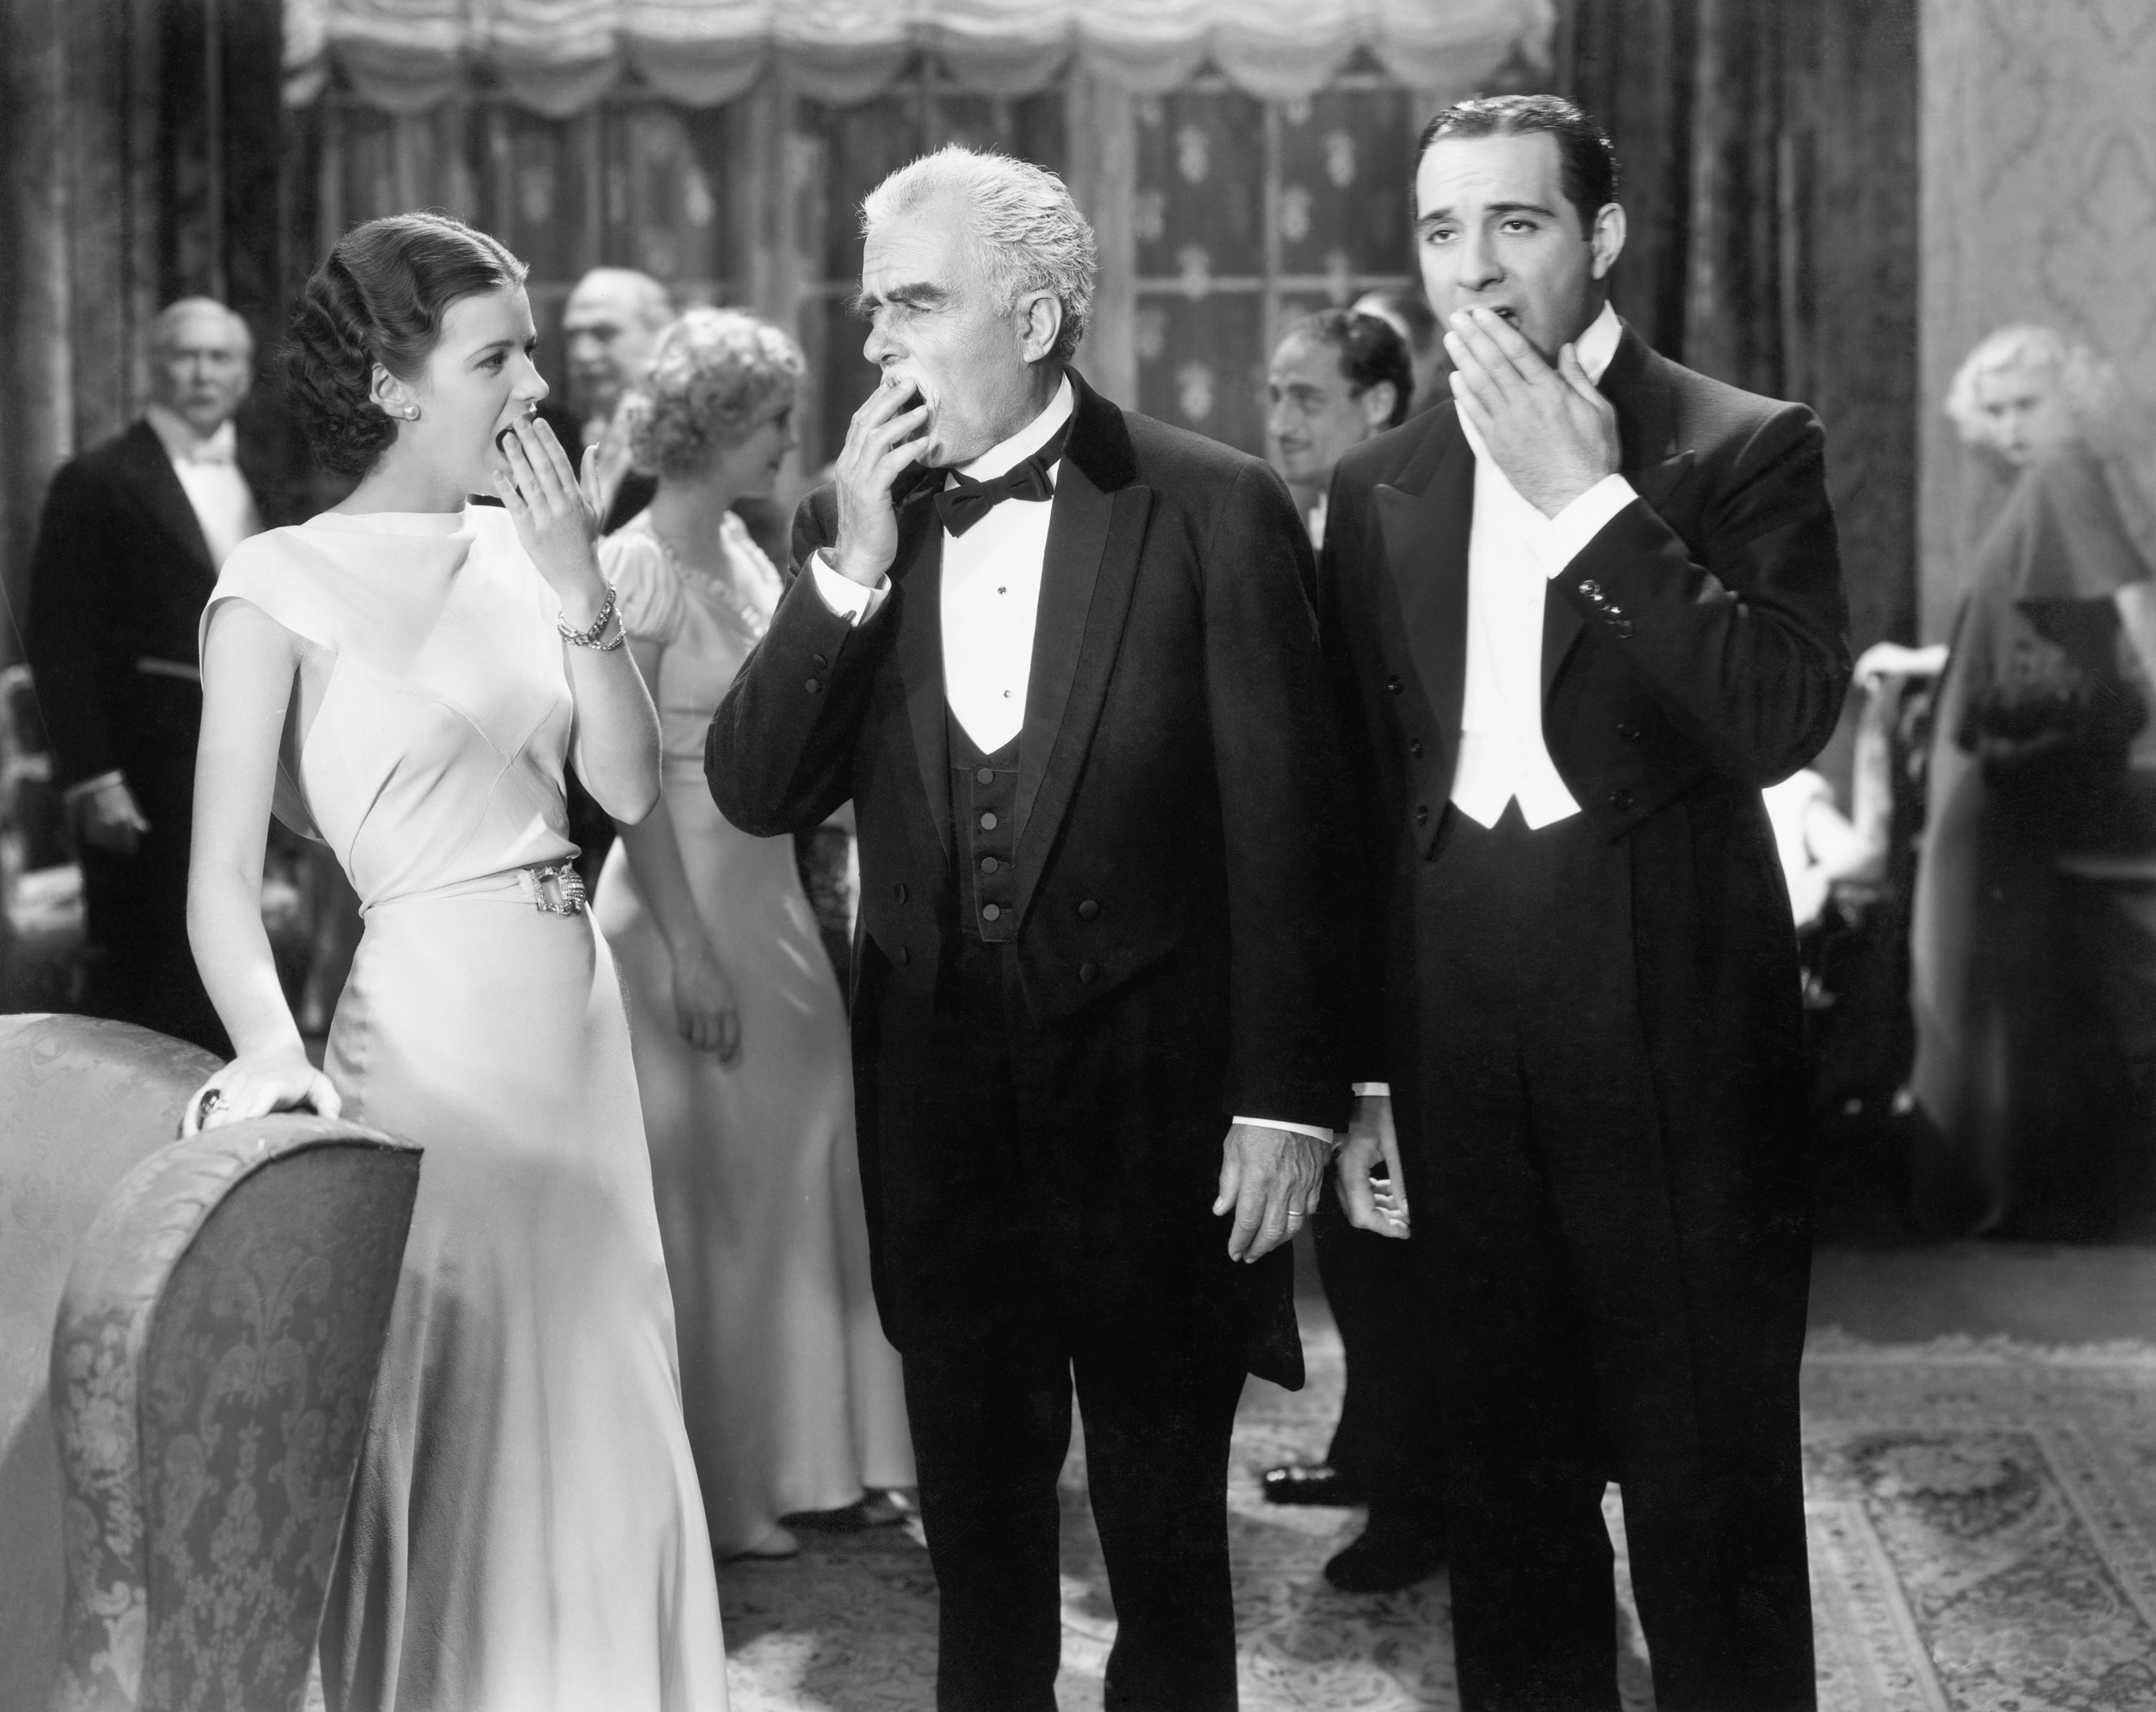 Two men in tuxedos and a lady in a gown standing and yawning at the forefront of vintage white and black photo with other people wearing formal wear mingling in the background depicting an early 20th century elegant party.